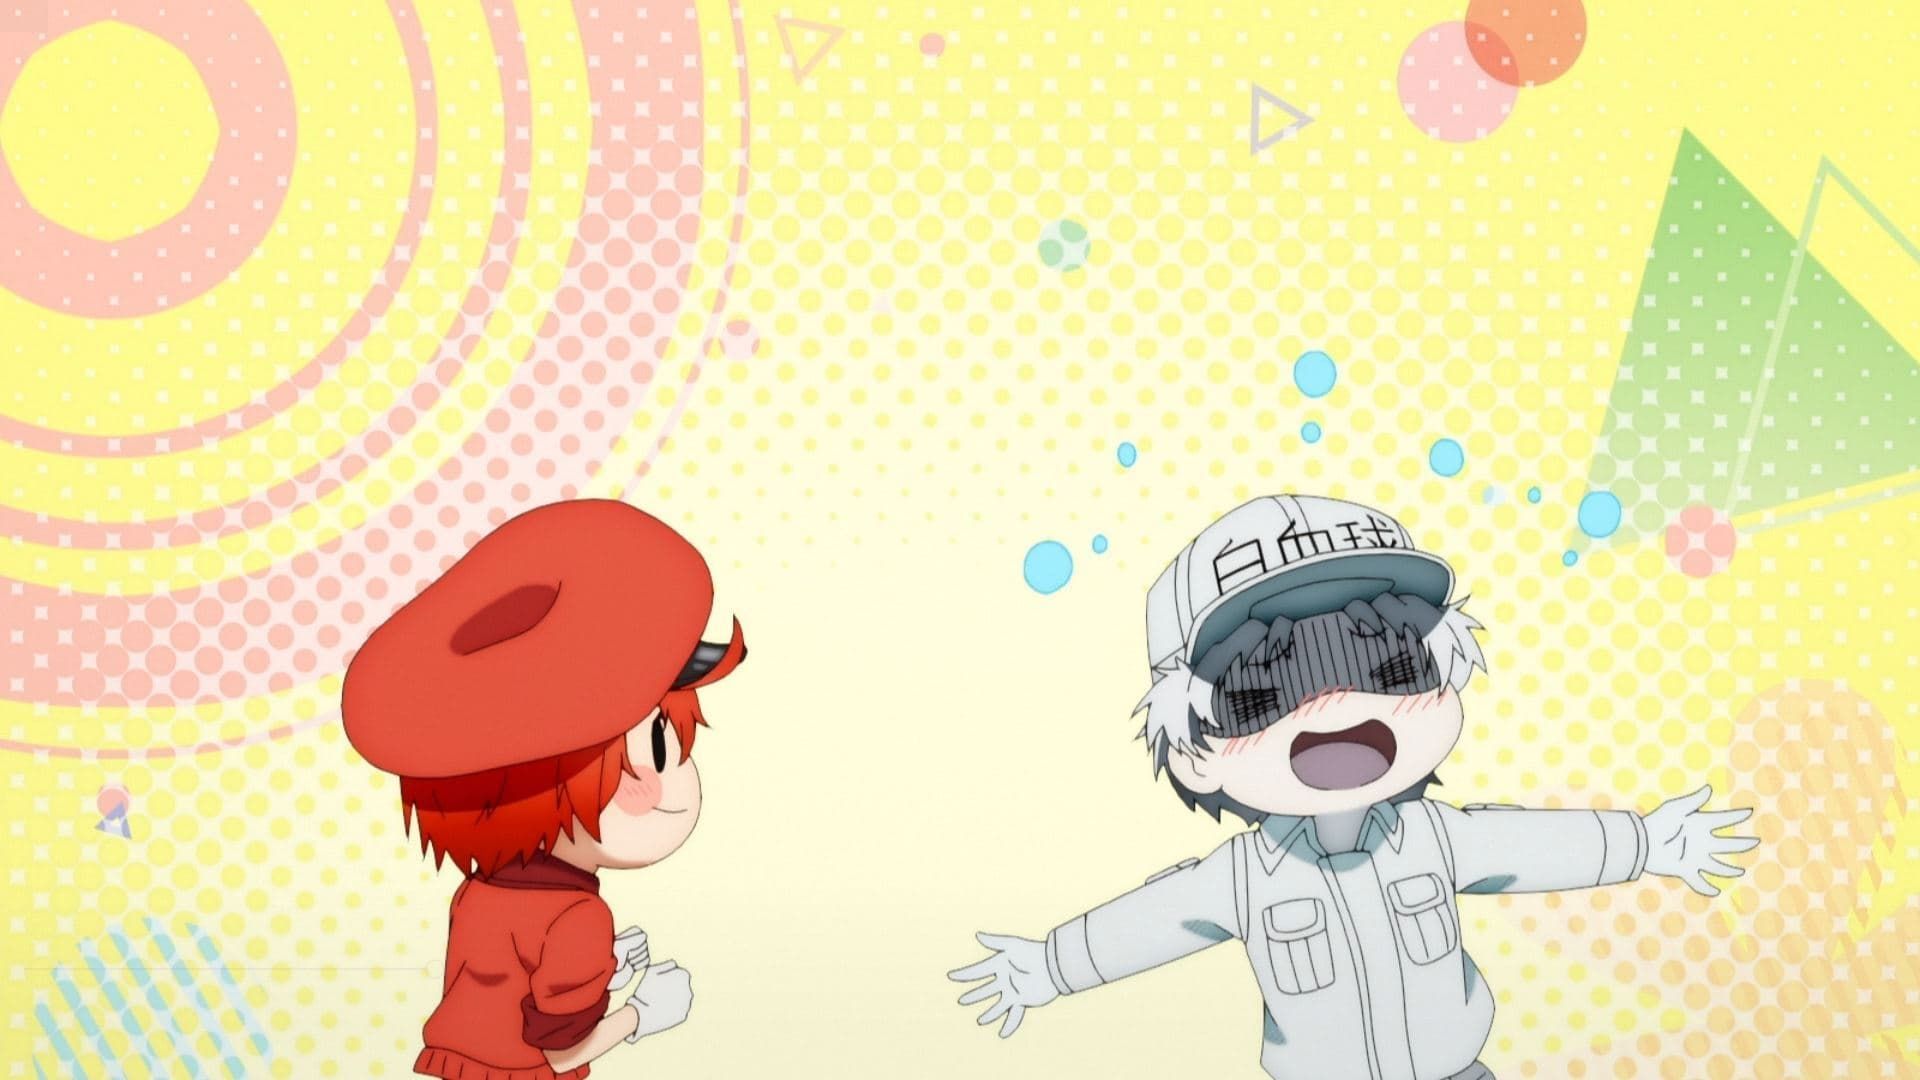 Watch Cells at Work!